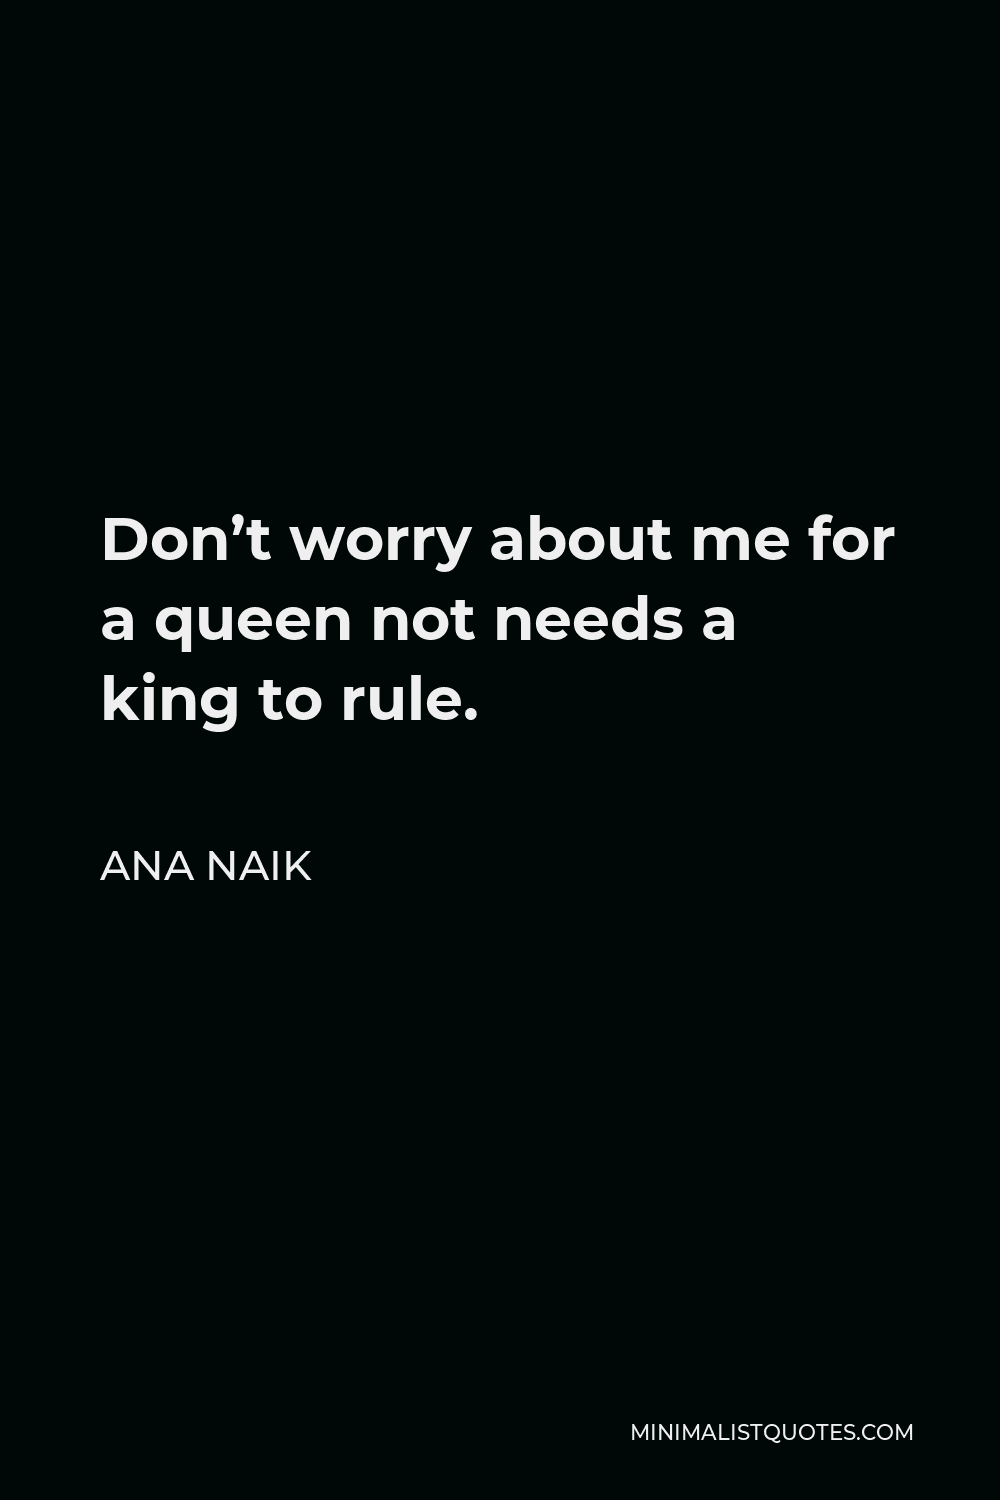 Ana Naik Quote - Don’t worry about me for a queen not needs a king to rule.